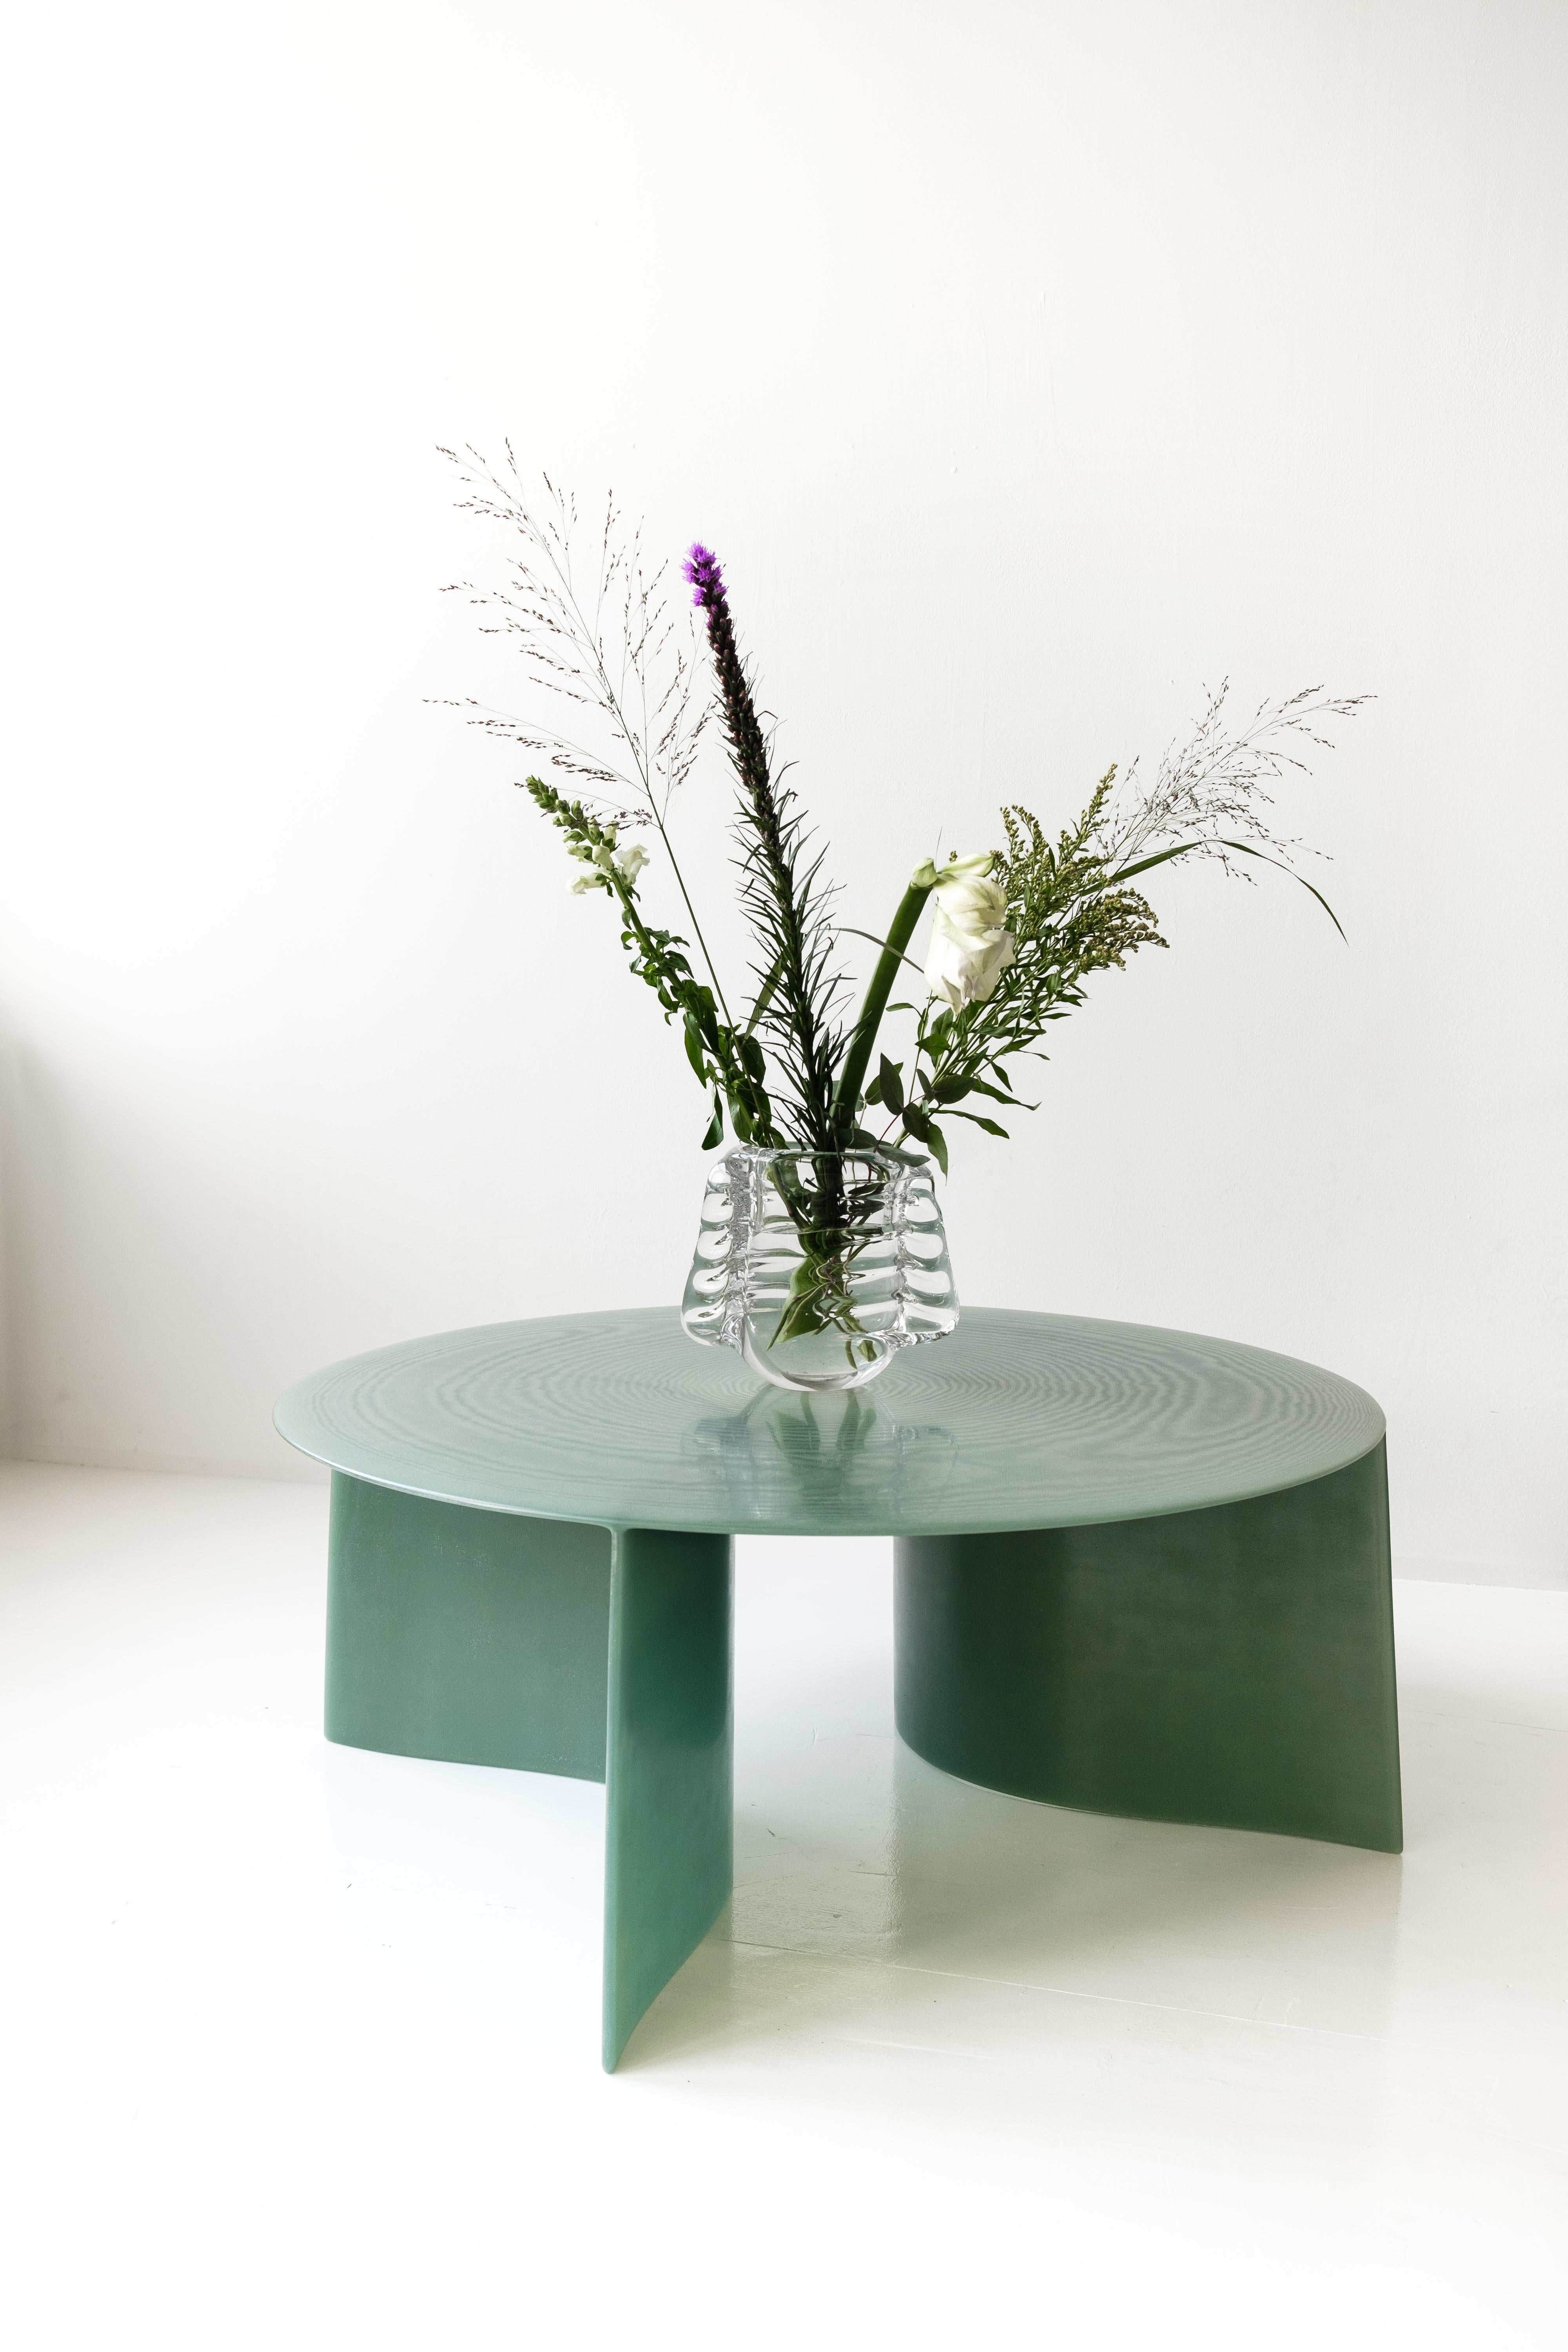 Contemporary Green Fiberglass, New Wave Coffee Table Round 120cm, by Lukas Cober 2